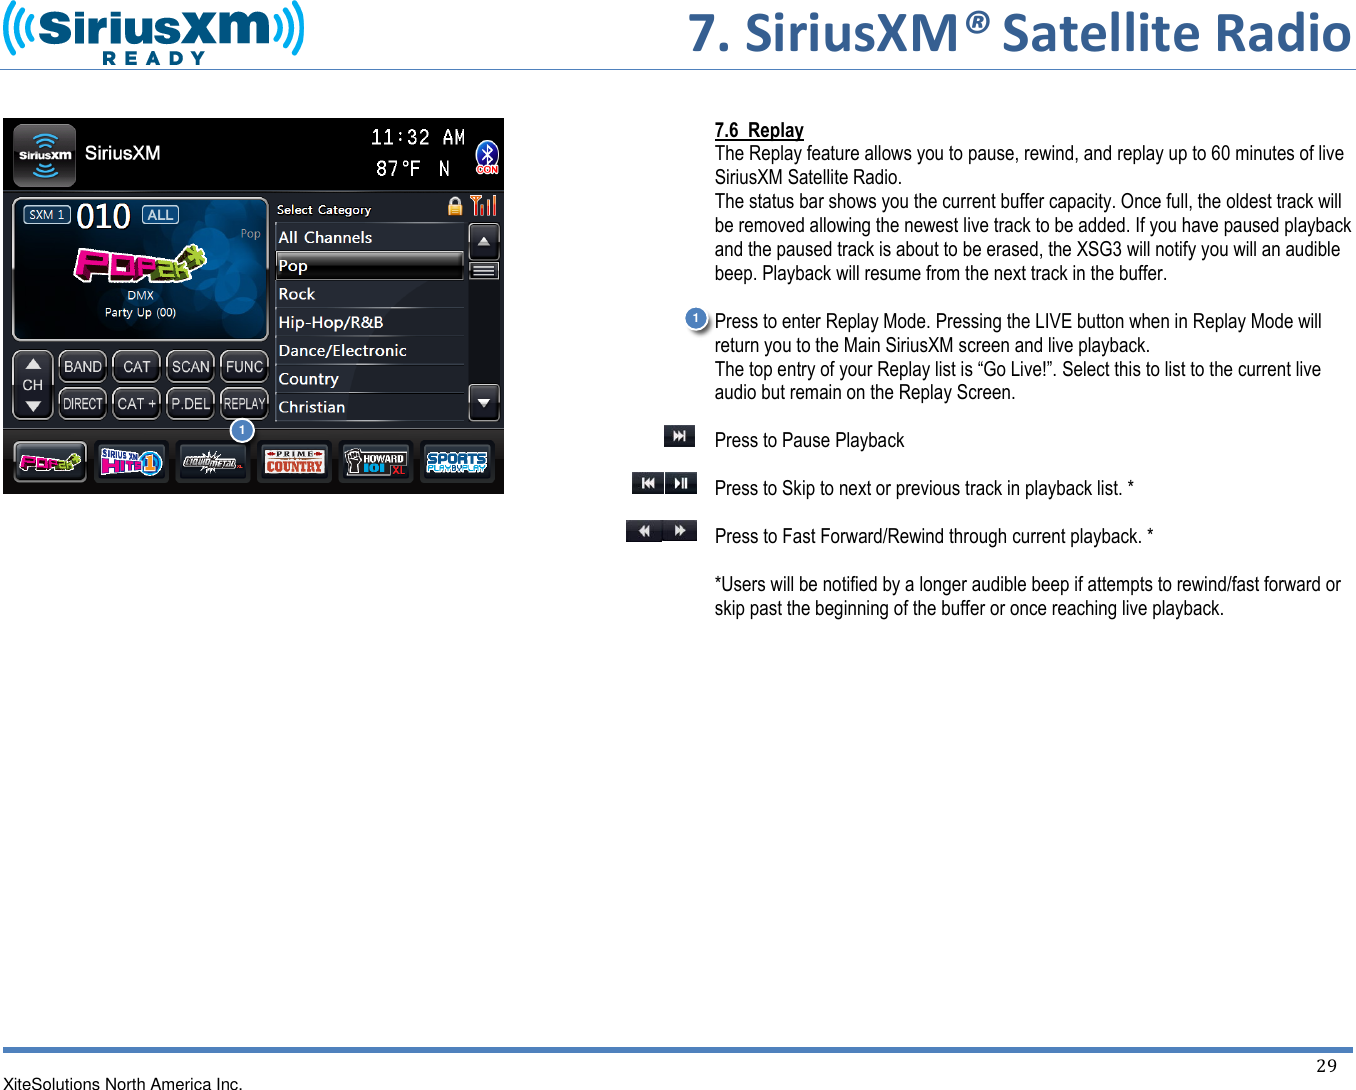       7. SiriusXM® Satellite Radio   XiteSolutions North America Inc.  29                          7.6  Replay The Replay feature allows you to pause, rewind, and replay up to 60 minutes of live SiriusXM Satellite Radio. The status bar shows you the current buffer capacity. Once full, the oldest track will be removed allowing the newest live track to be added. If you have paused playback and the paused track is about to be erased, the XSG3 will notify you will an audible beep. Playback will resume from the next track in the buffer.  Press to enter Replay Mode. Pressing the LIVE button when in Replay Mode will return you to the Main SiriusXM screen and live playback. The top entry of your Replay list is “Go Live!”. Select this to list to the current live audio but remain on the Replay Screen.  Press to Pause Playback  Press to Skip to next or previous track in playback list. *  Press to Fast Forward/Rewind through current playback. *  *Users will be notified by a longer audible beep if attempts to rewind/fast forward or skip past the beginning of the buffer or once reaching live playback.           1 1 